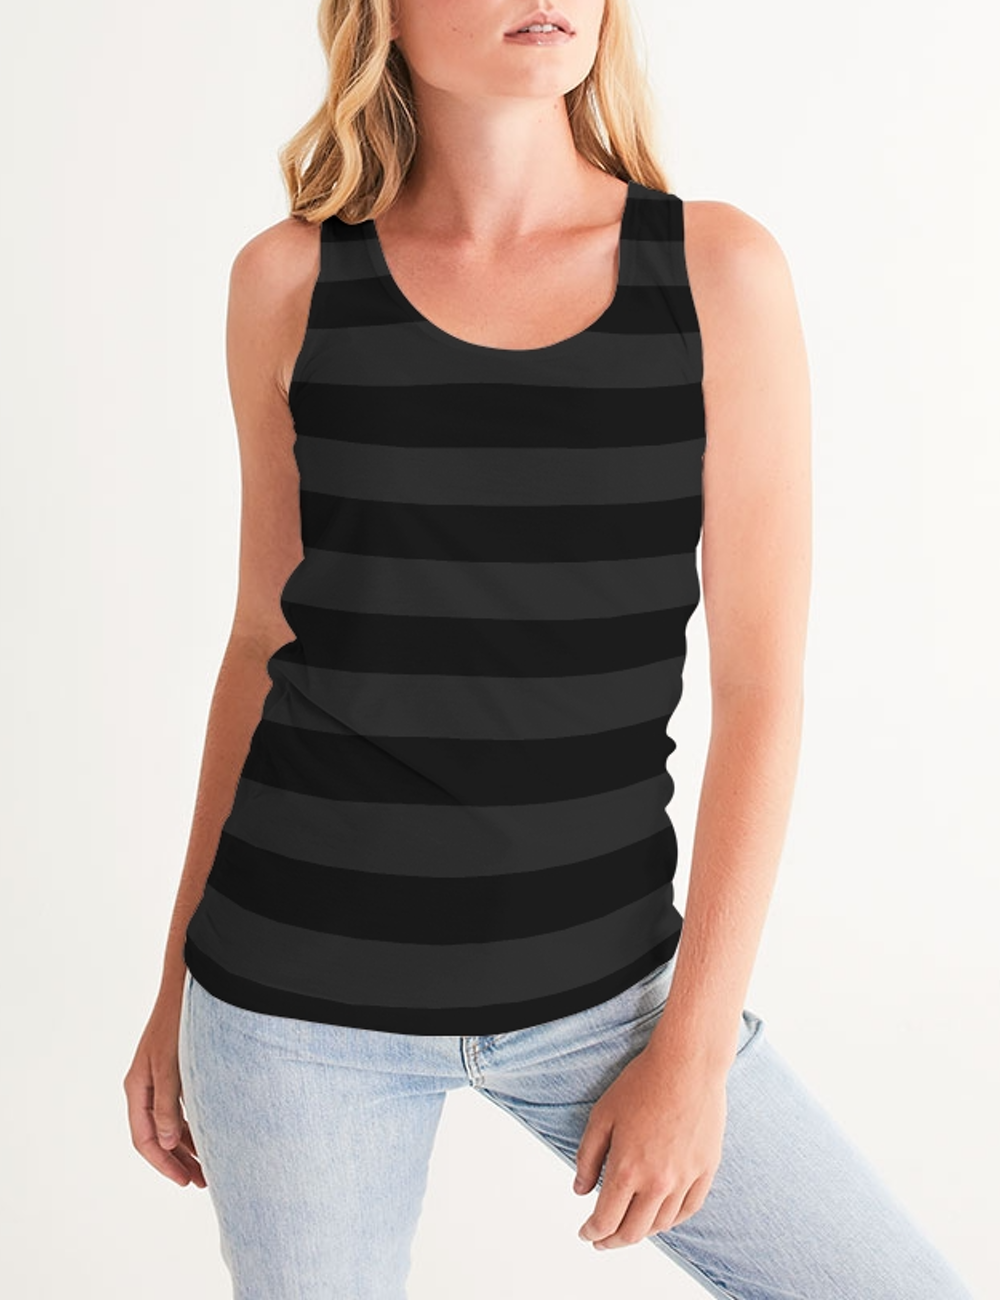 Dark Grey Lines | Women's Fitted Sublimated Tank Top OniTakai